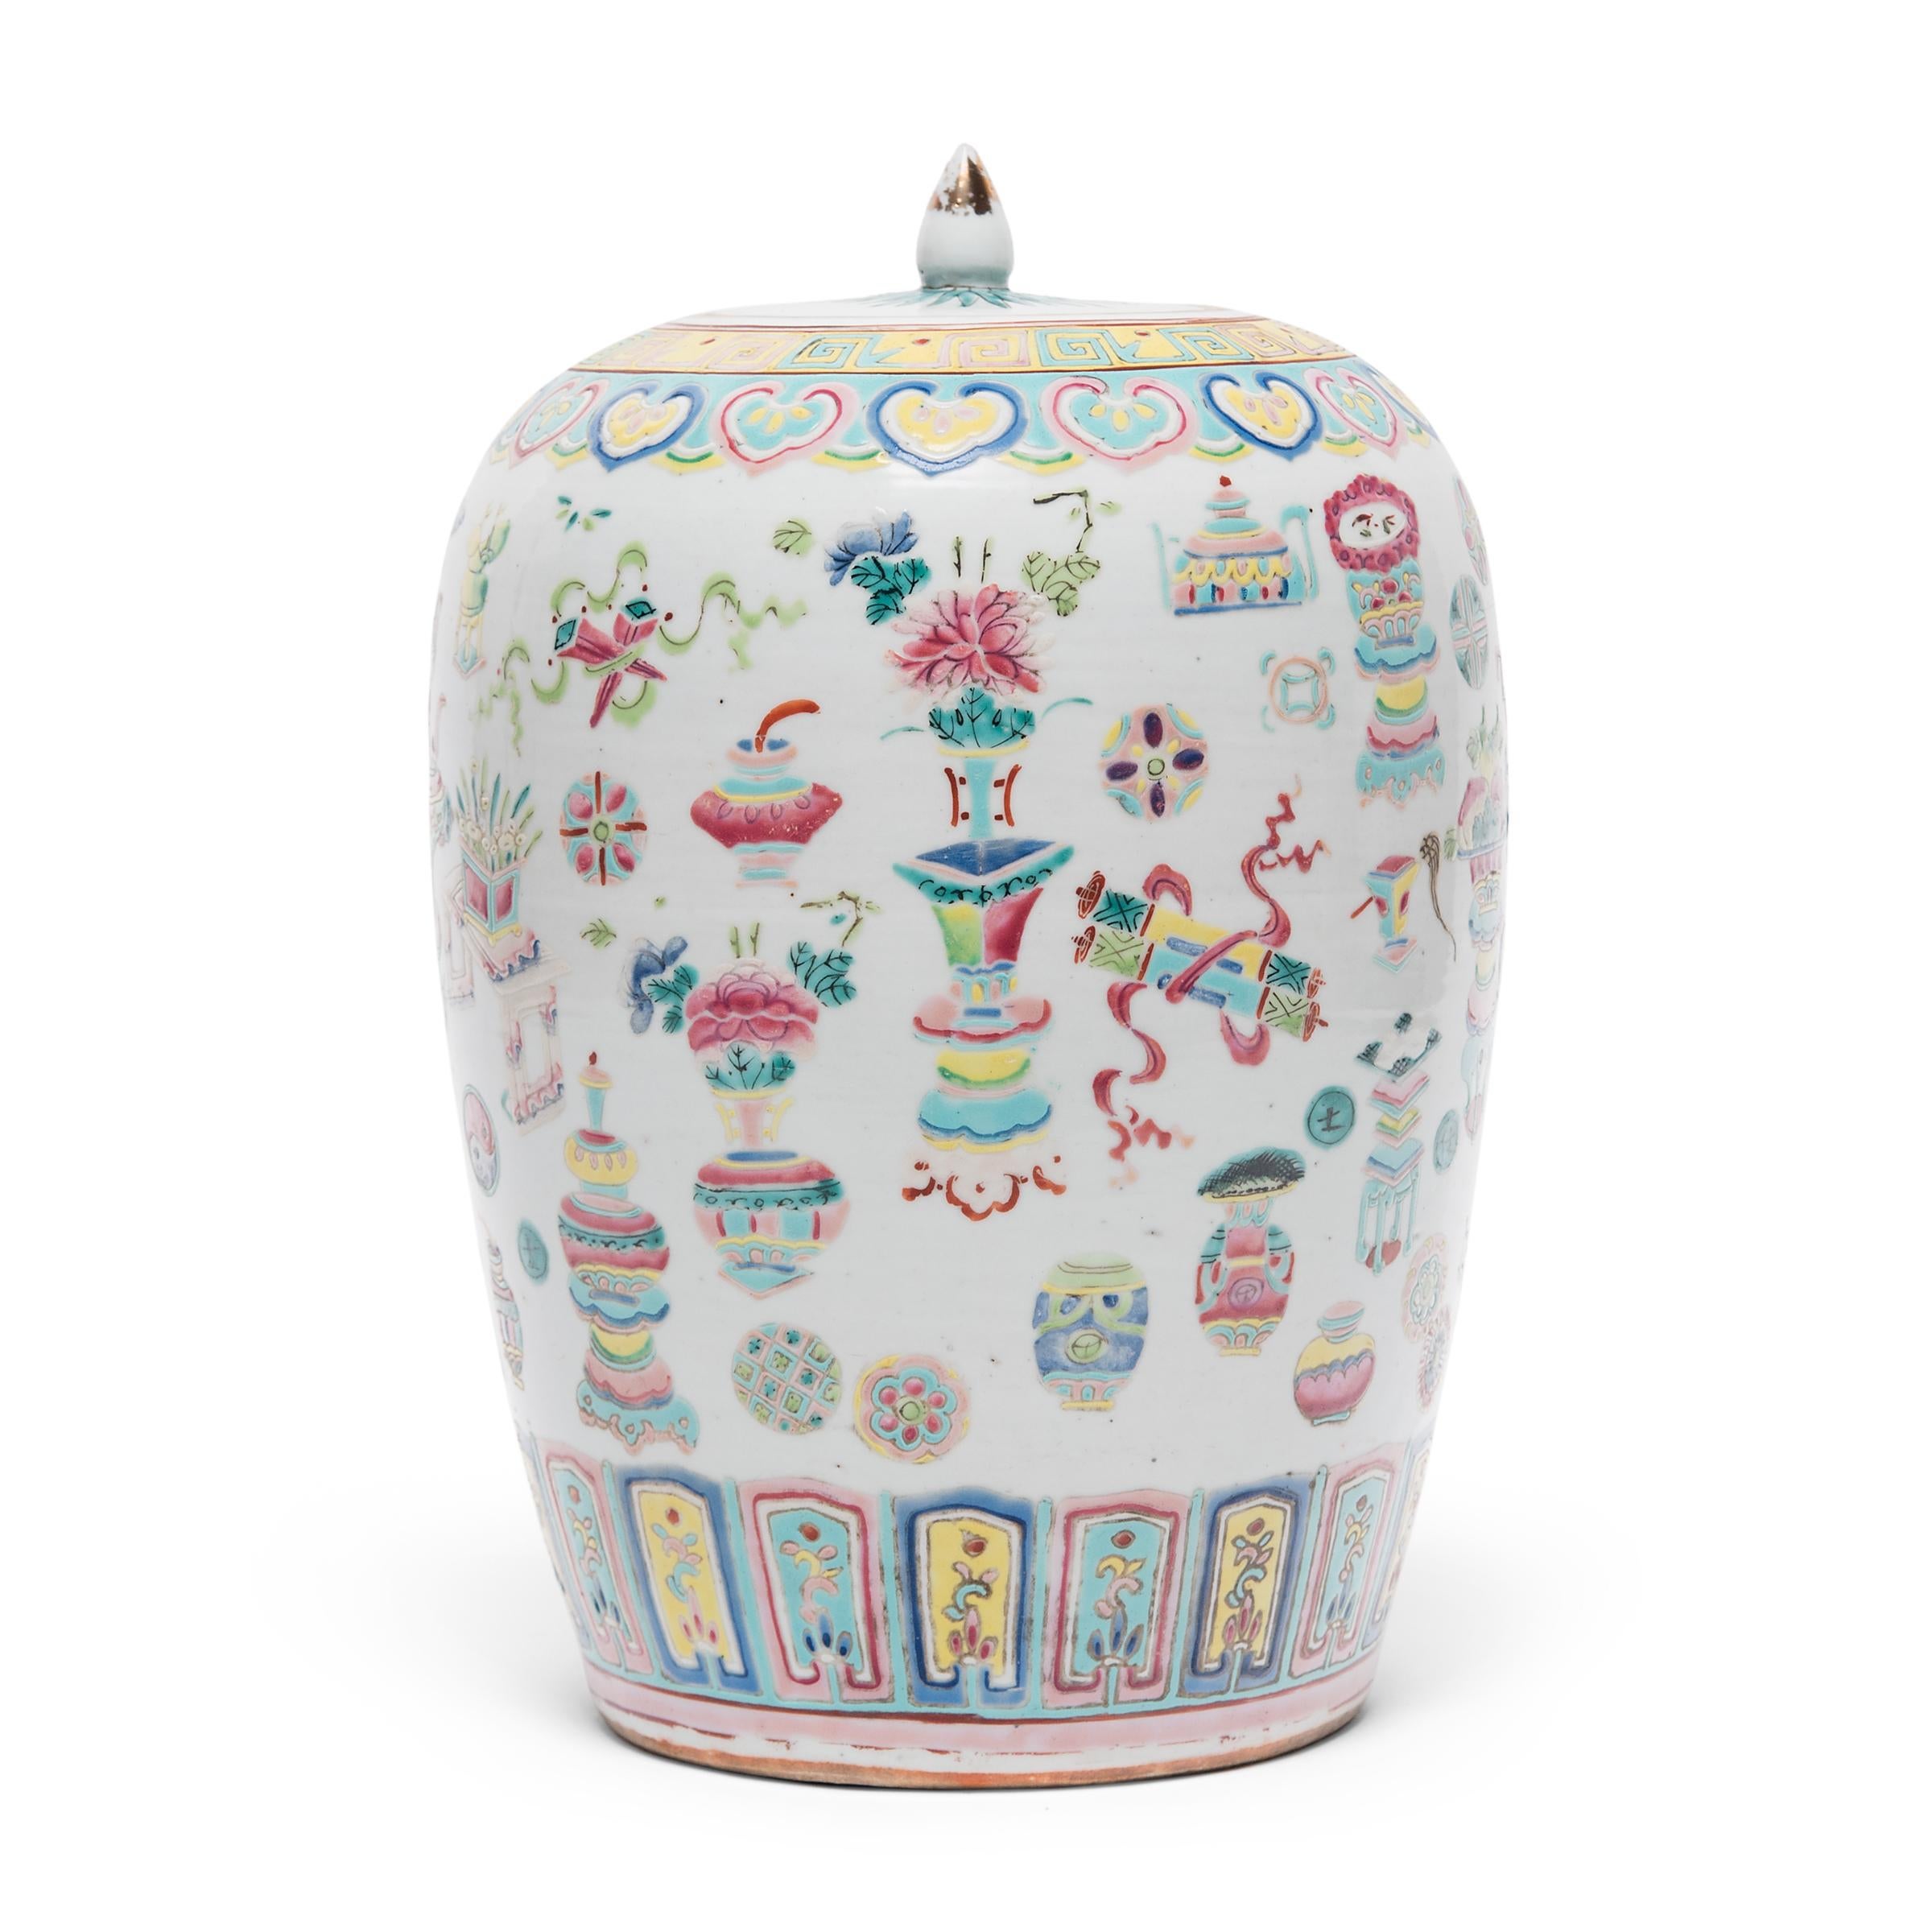 Qing Chinese Famille Rose Ginger Jar with Scholars' Objects, c. 1900